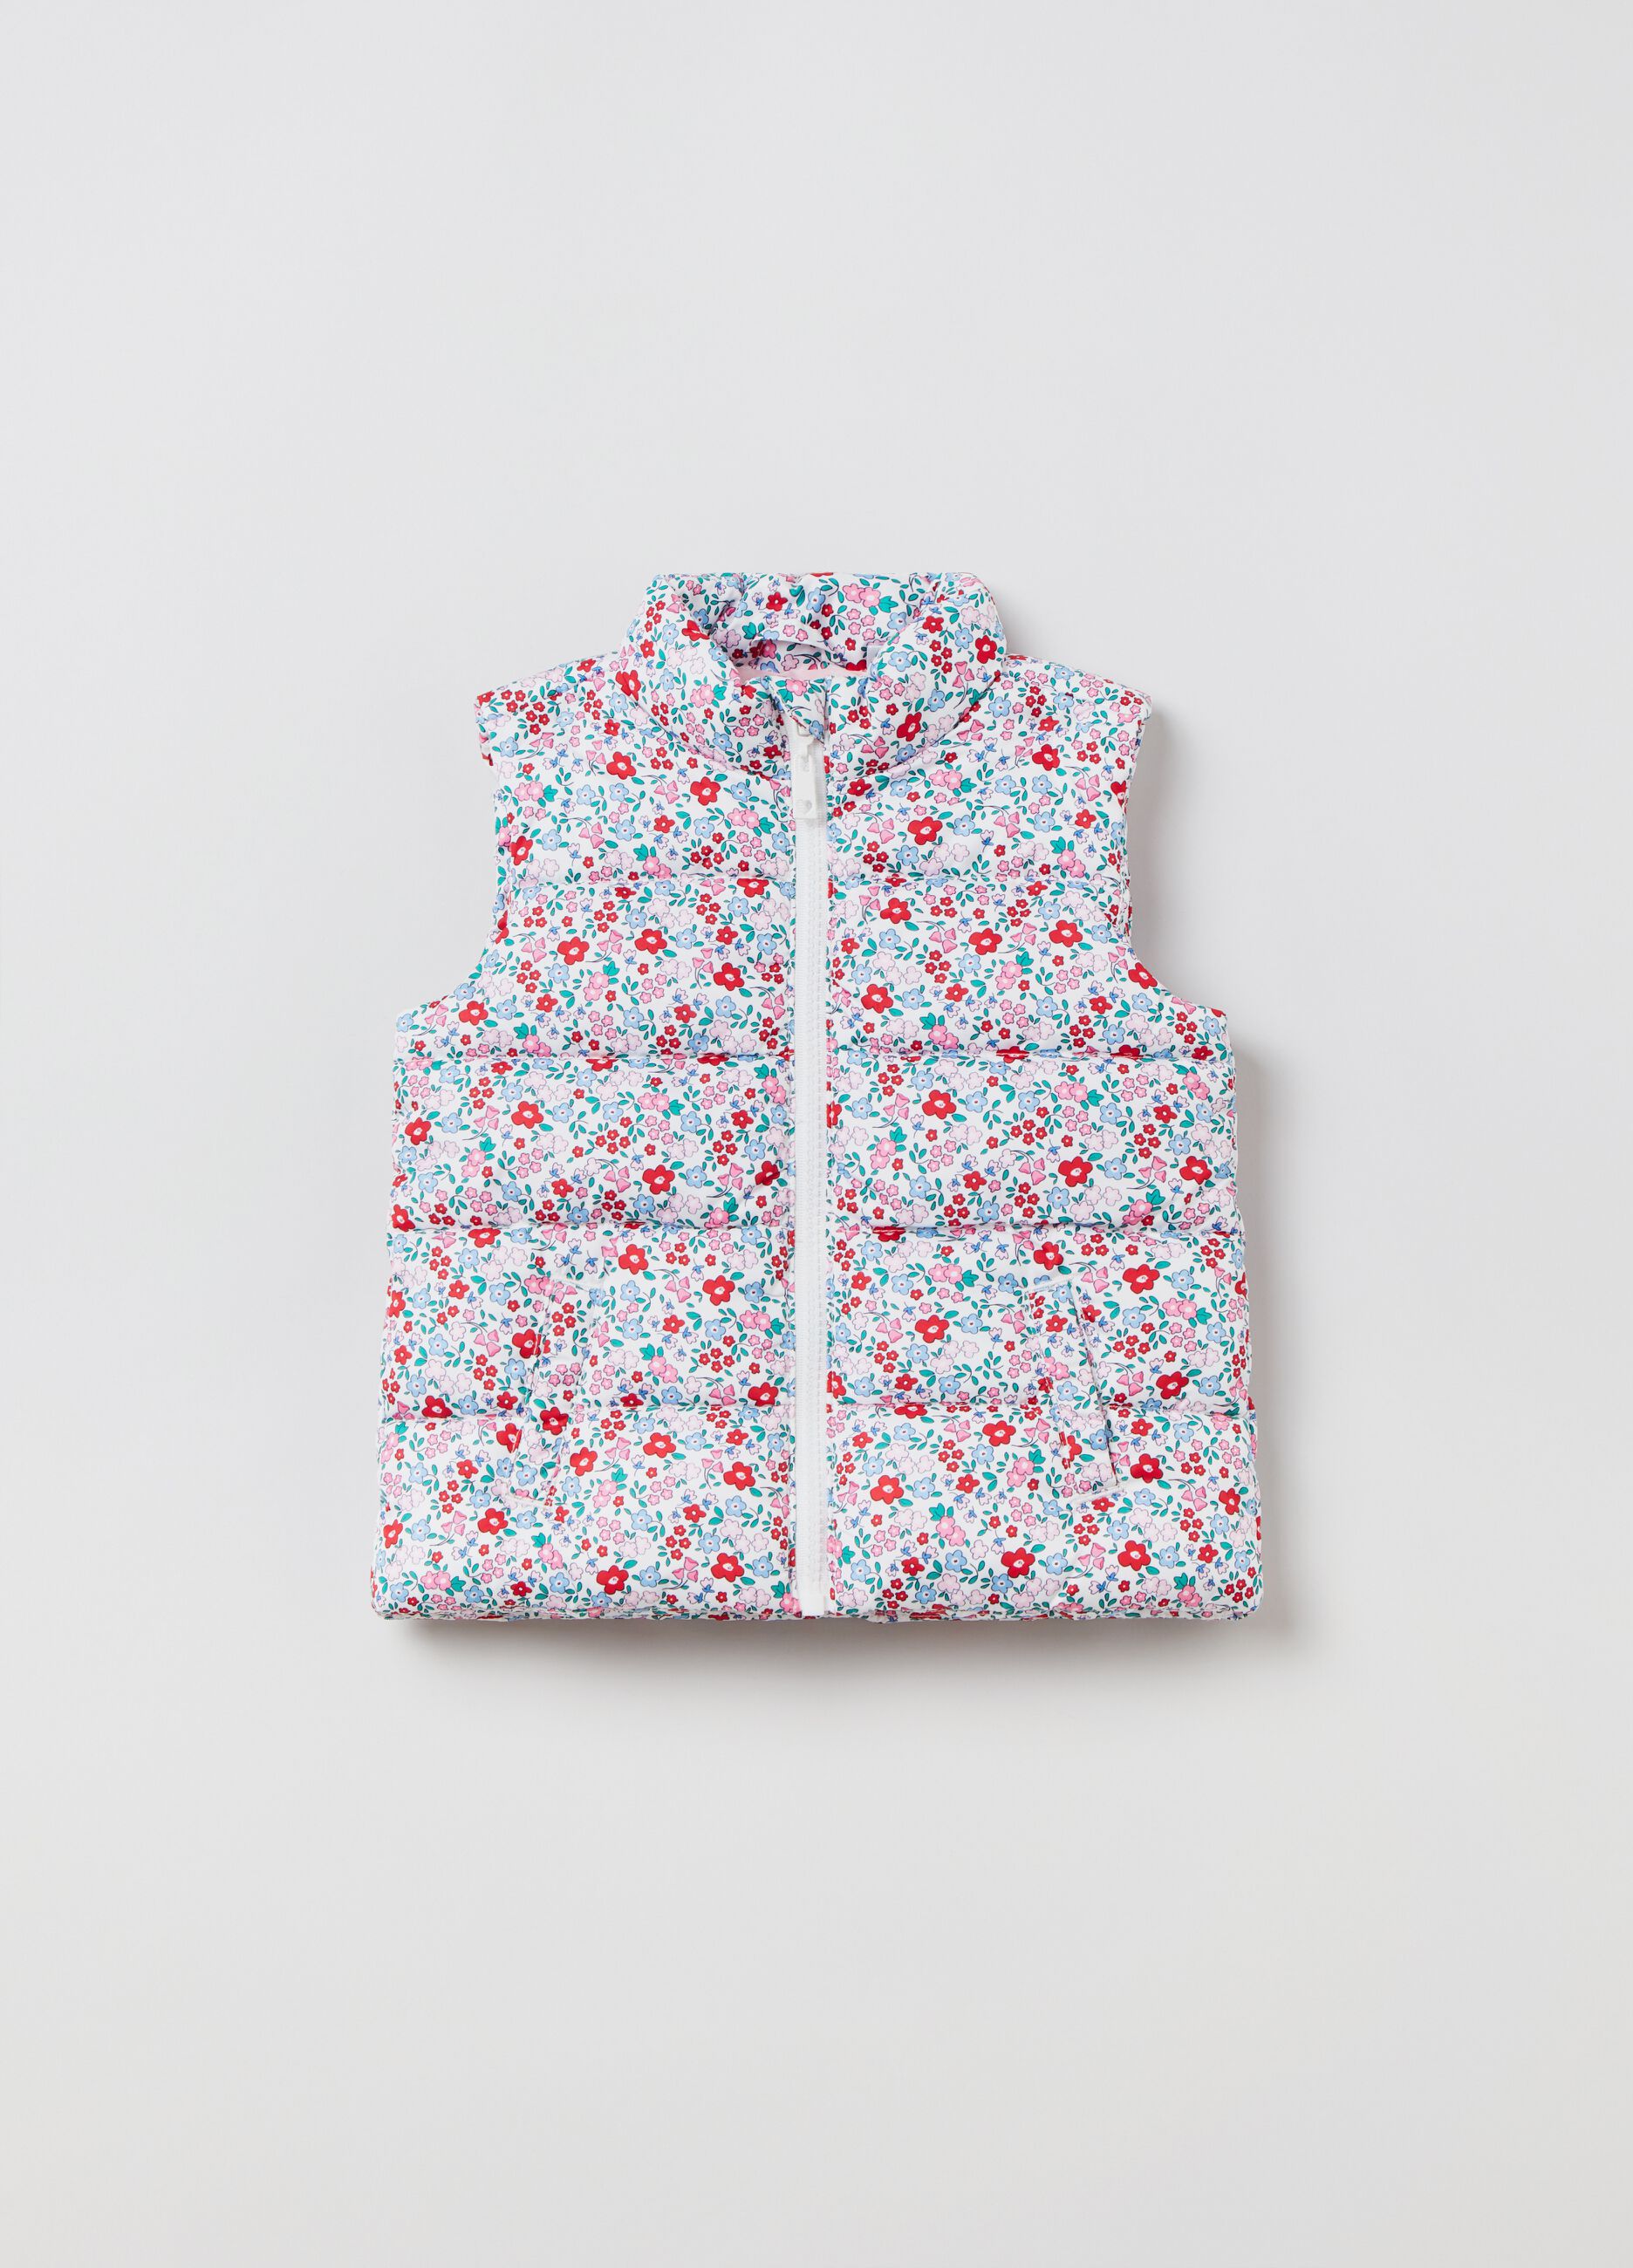 Padded gilet with flowers pattern